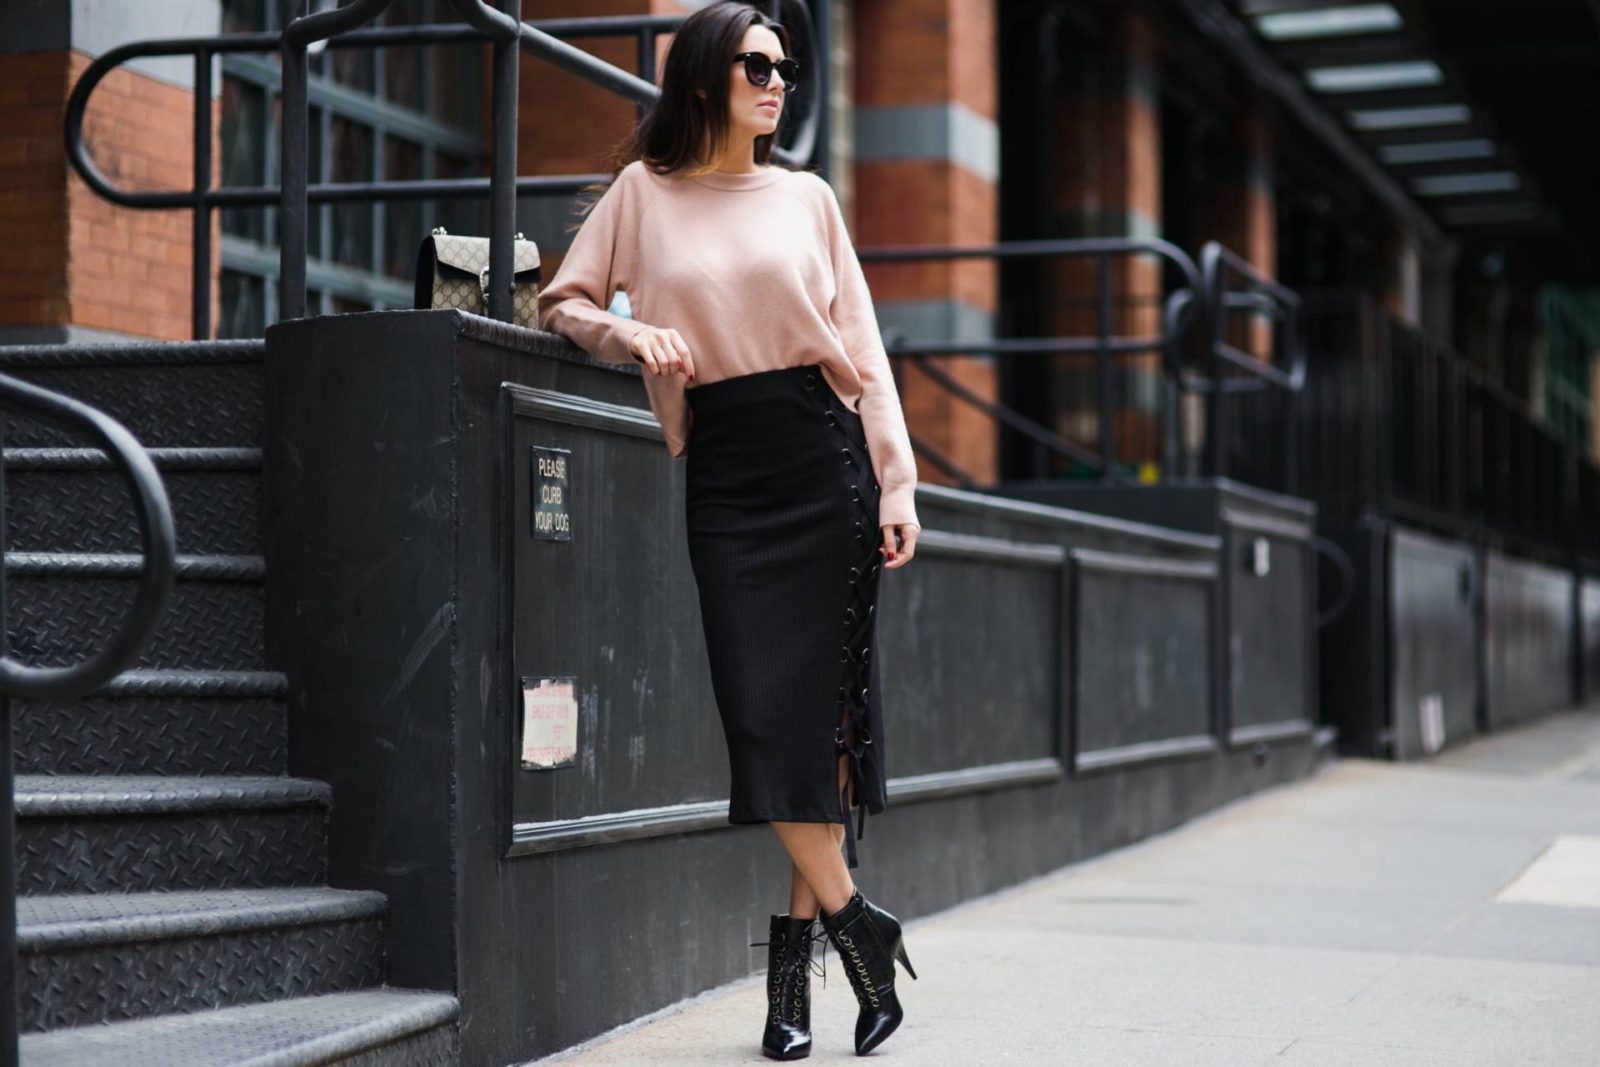 Now Styling: Soft Sweaters with Skirts